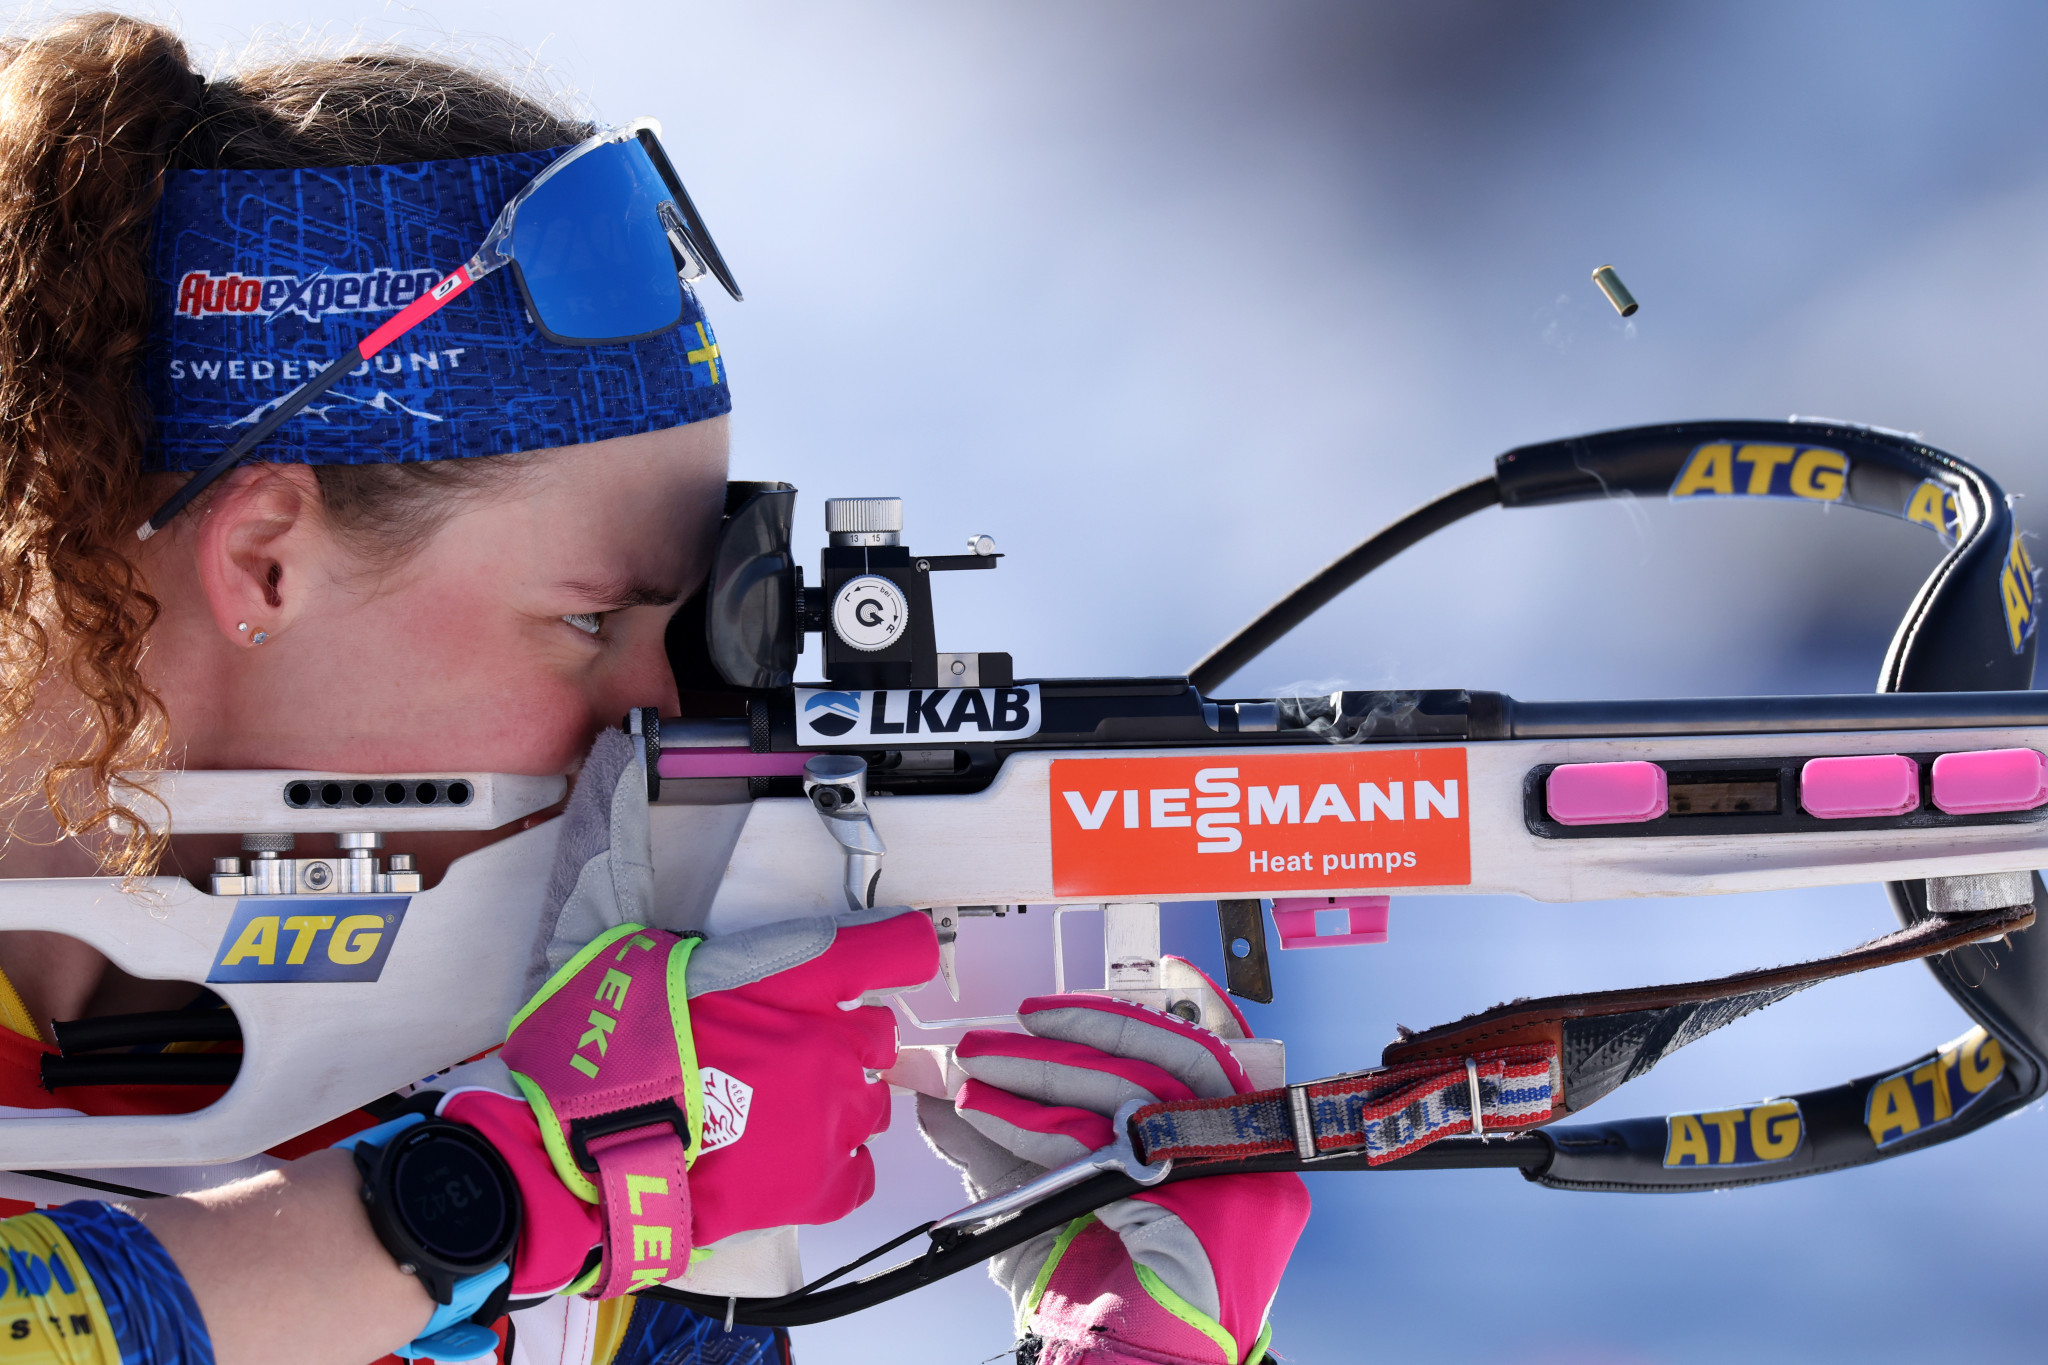 Öberg had dropped to 33rd after her performance at the first shooting station but staged a magnificent recovery to win gold on the final loop ©Getty Images